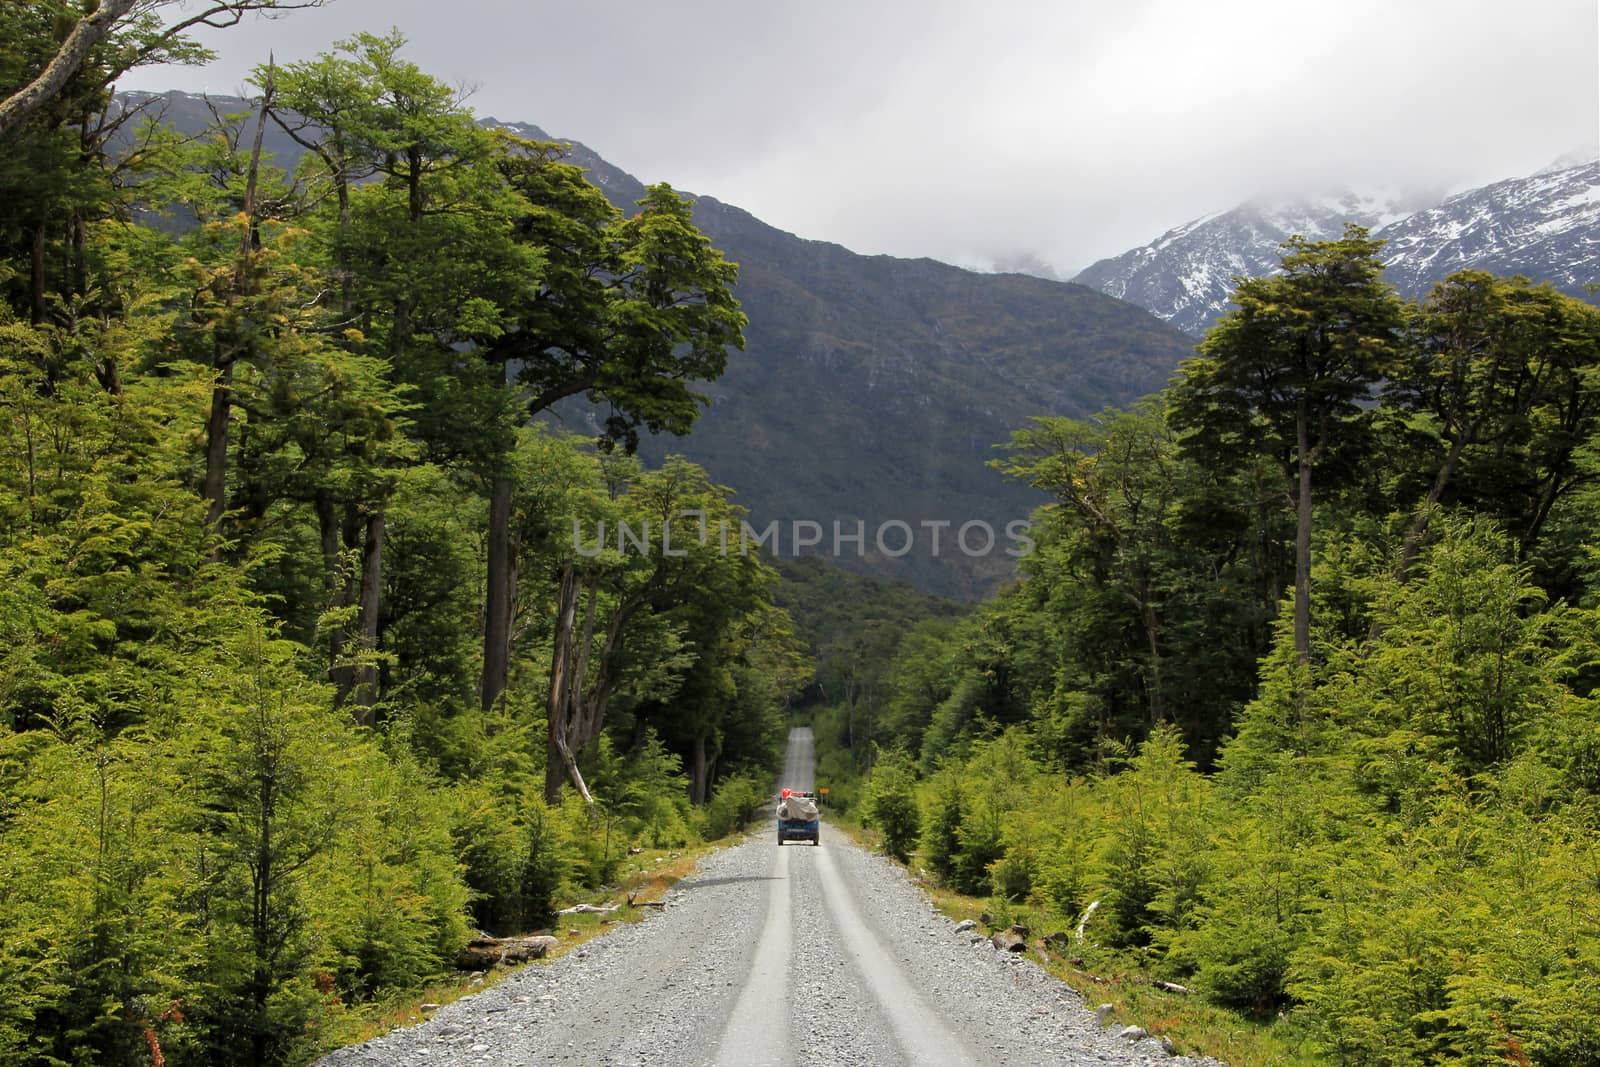 Van driving on Carretera Austral, Chile by cicloco